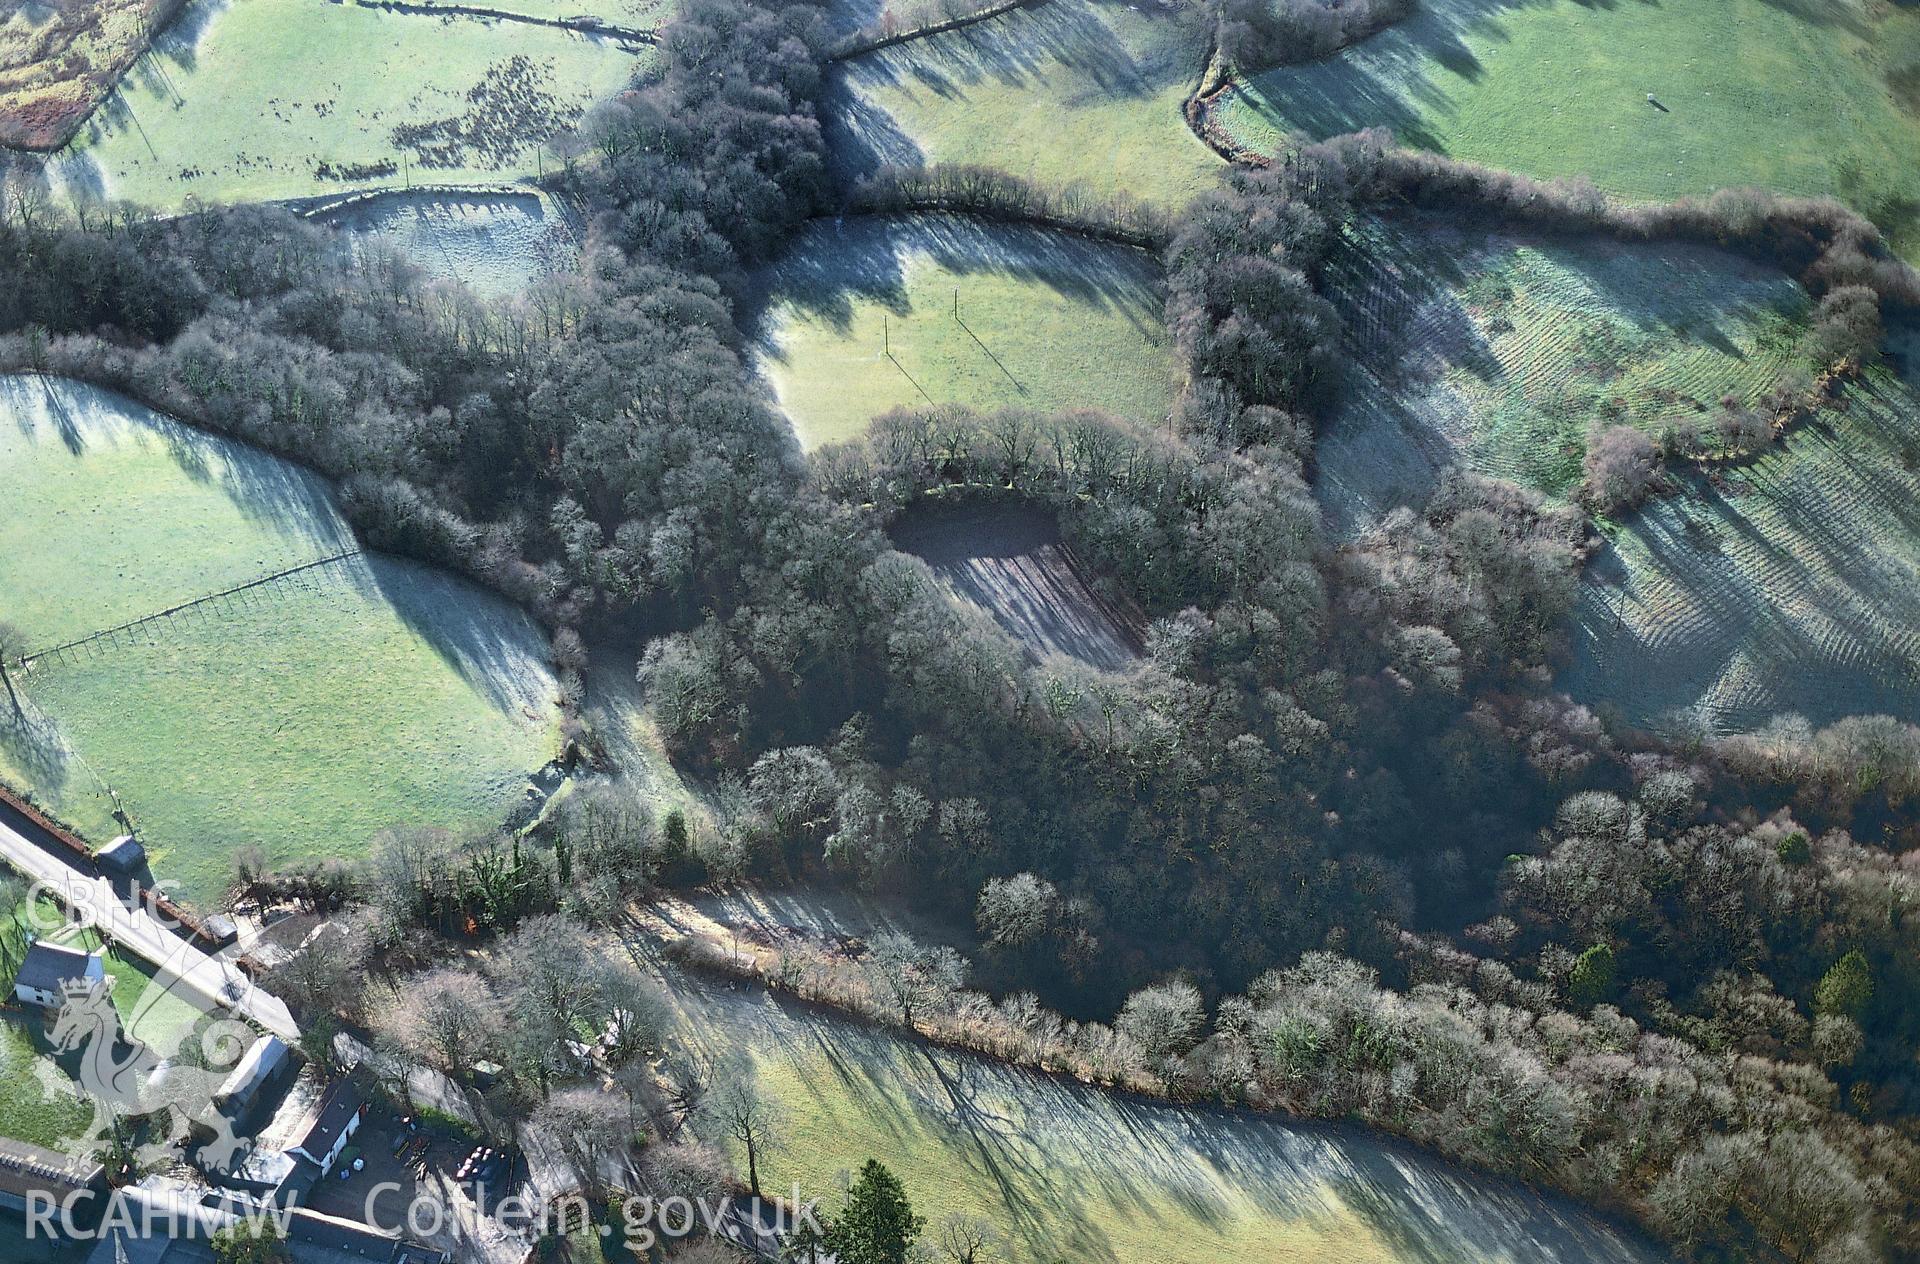 RCAHMW colour slide oblique aerial photograph of Castell Cwmere, Temple Bar, Llanfihangel Ystrad, taken on 19/12/1999 by Toby Driver